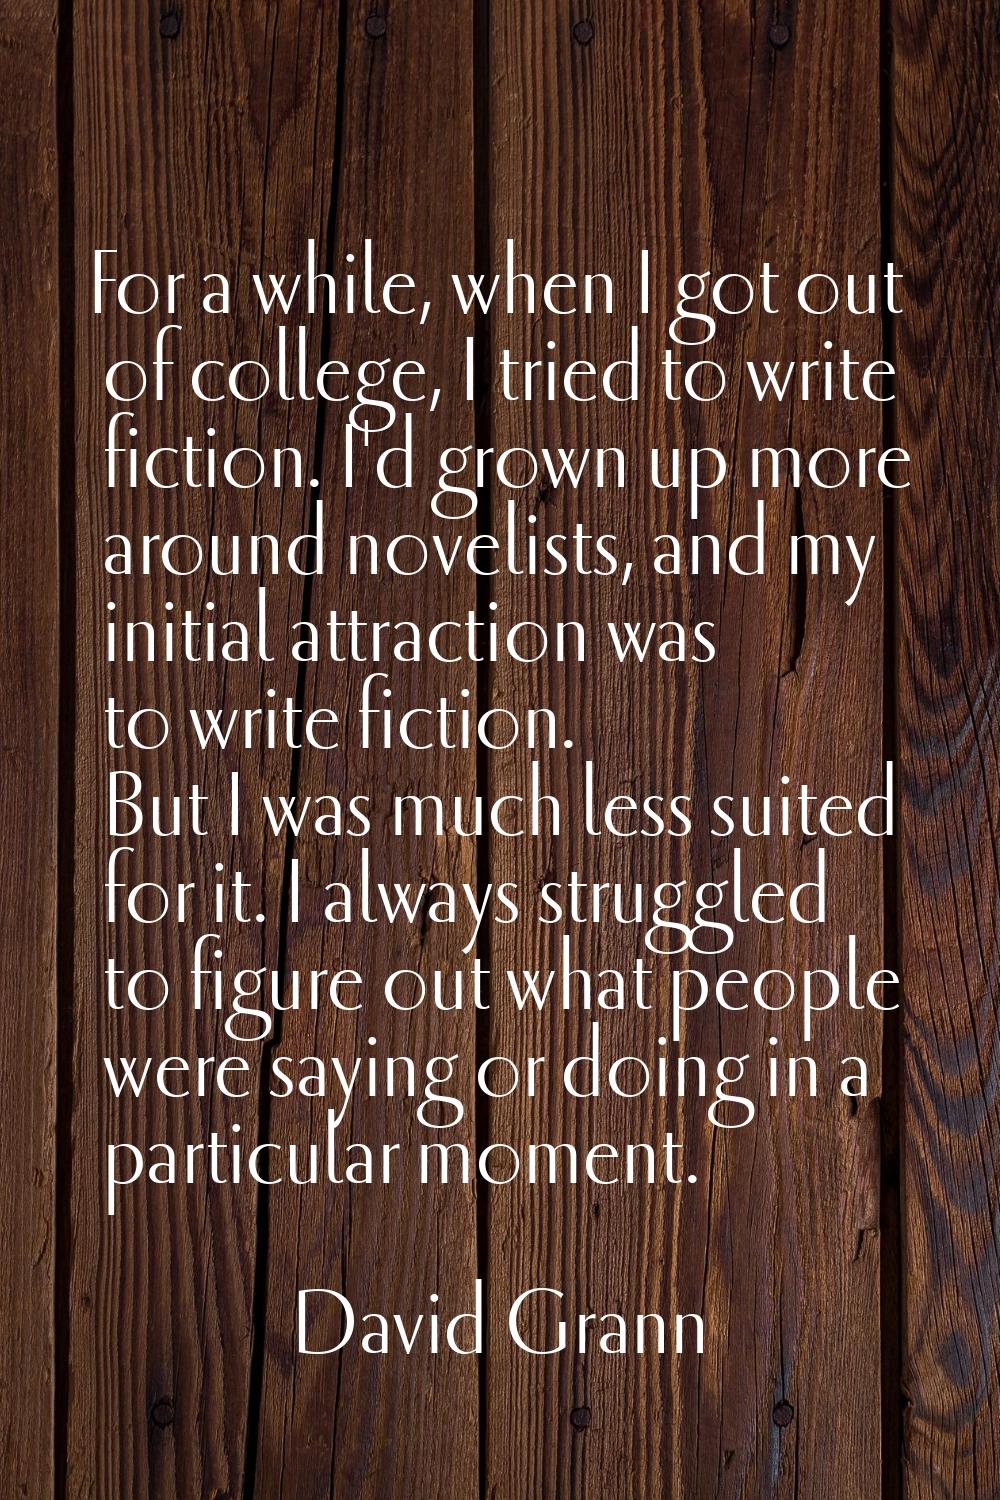 For a while, when I got out of college, I tried to write fiction. I'd grown up more around novelist